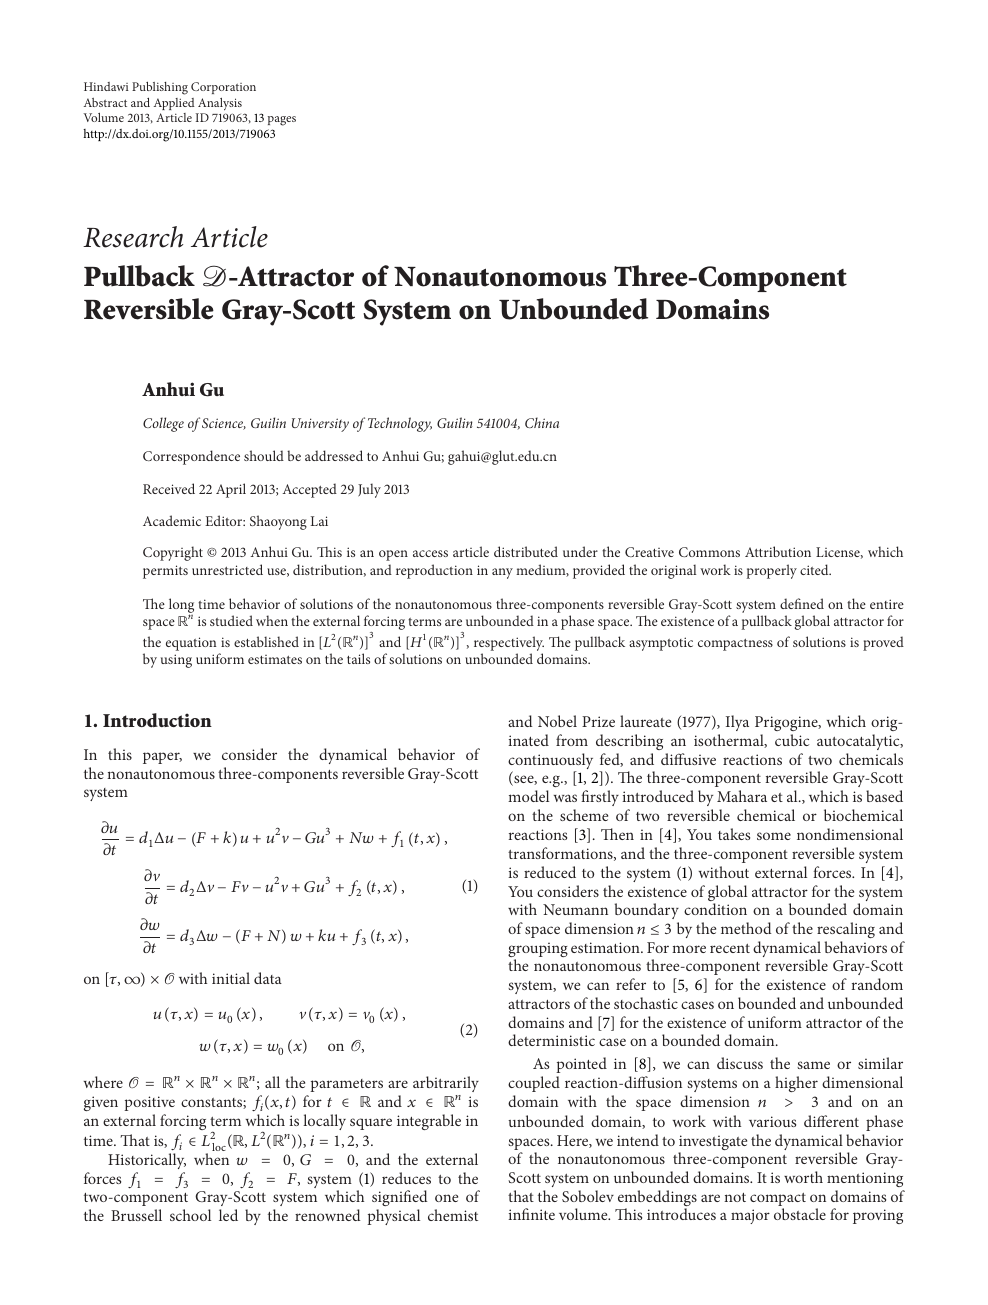 Pullback 𝒟 Attractor Of Nonautonomous Three Component Reversible Gray Scott System On Unbounded Domains Topic Of Research Paper In Mathematics Download Scholarly Article Pdf And Read For Free On Cyberleninka Open Science Hub